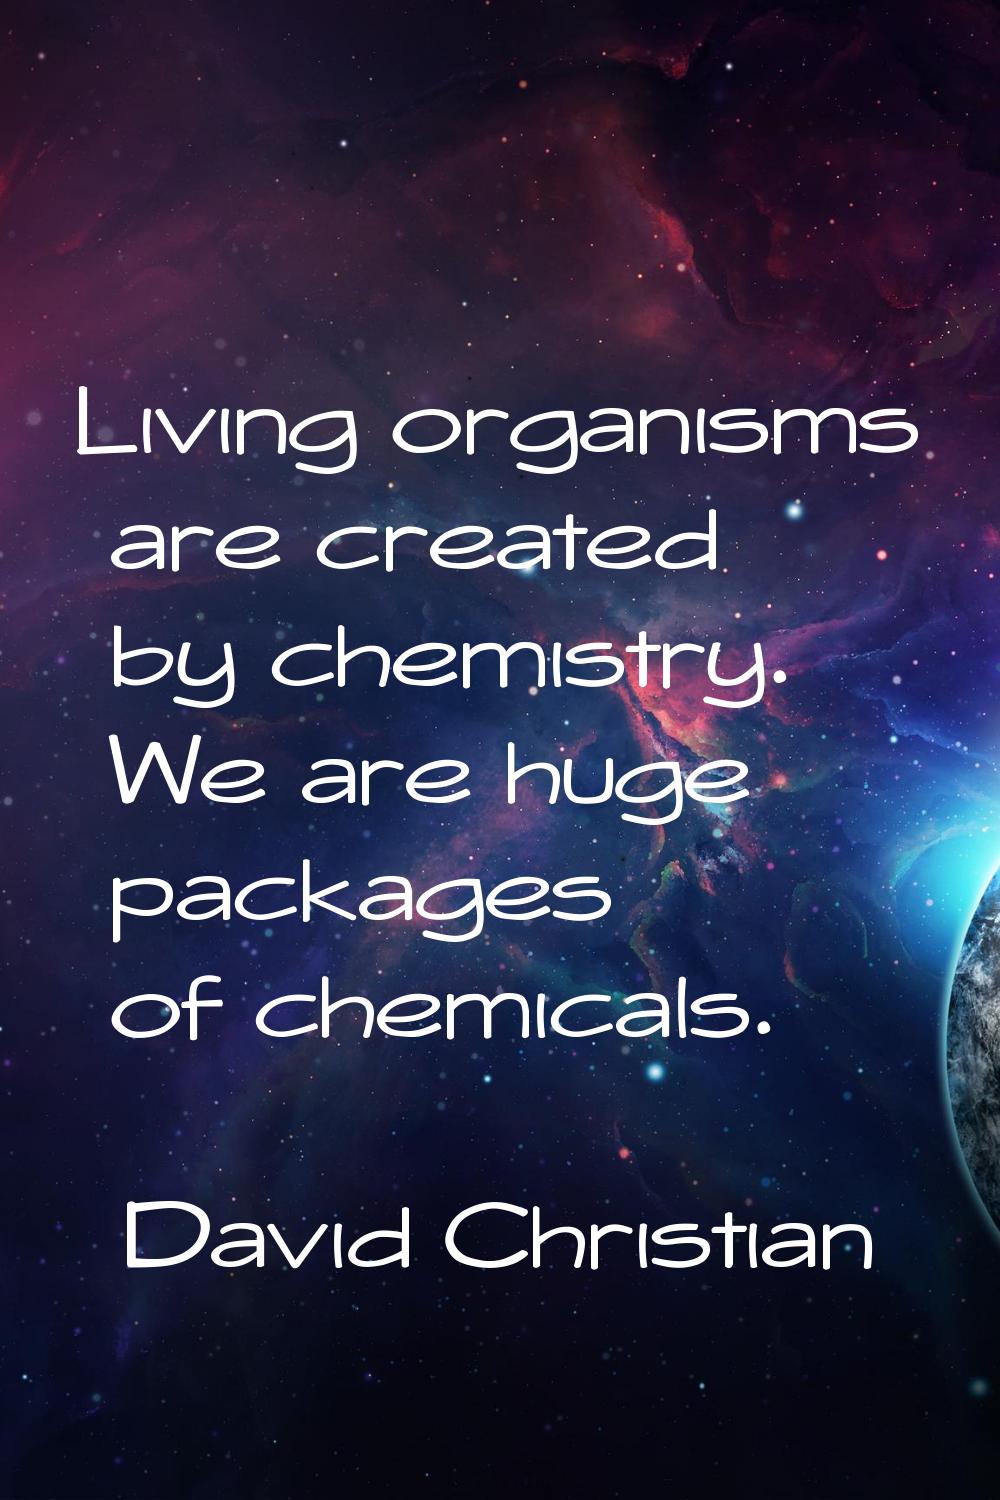 Living organisms are created by chemistry. We are huge packages of chemicals.